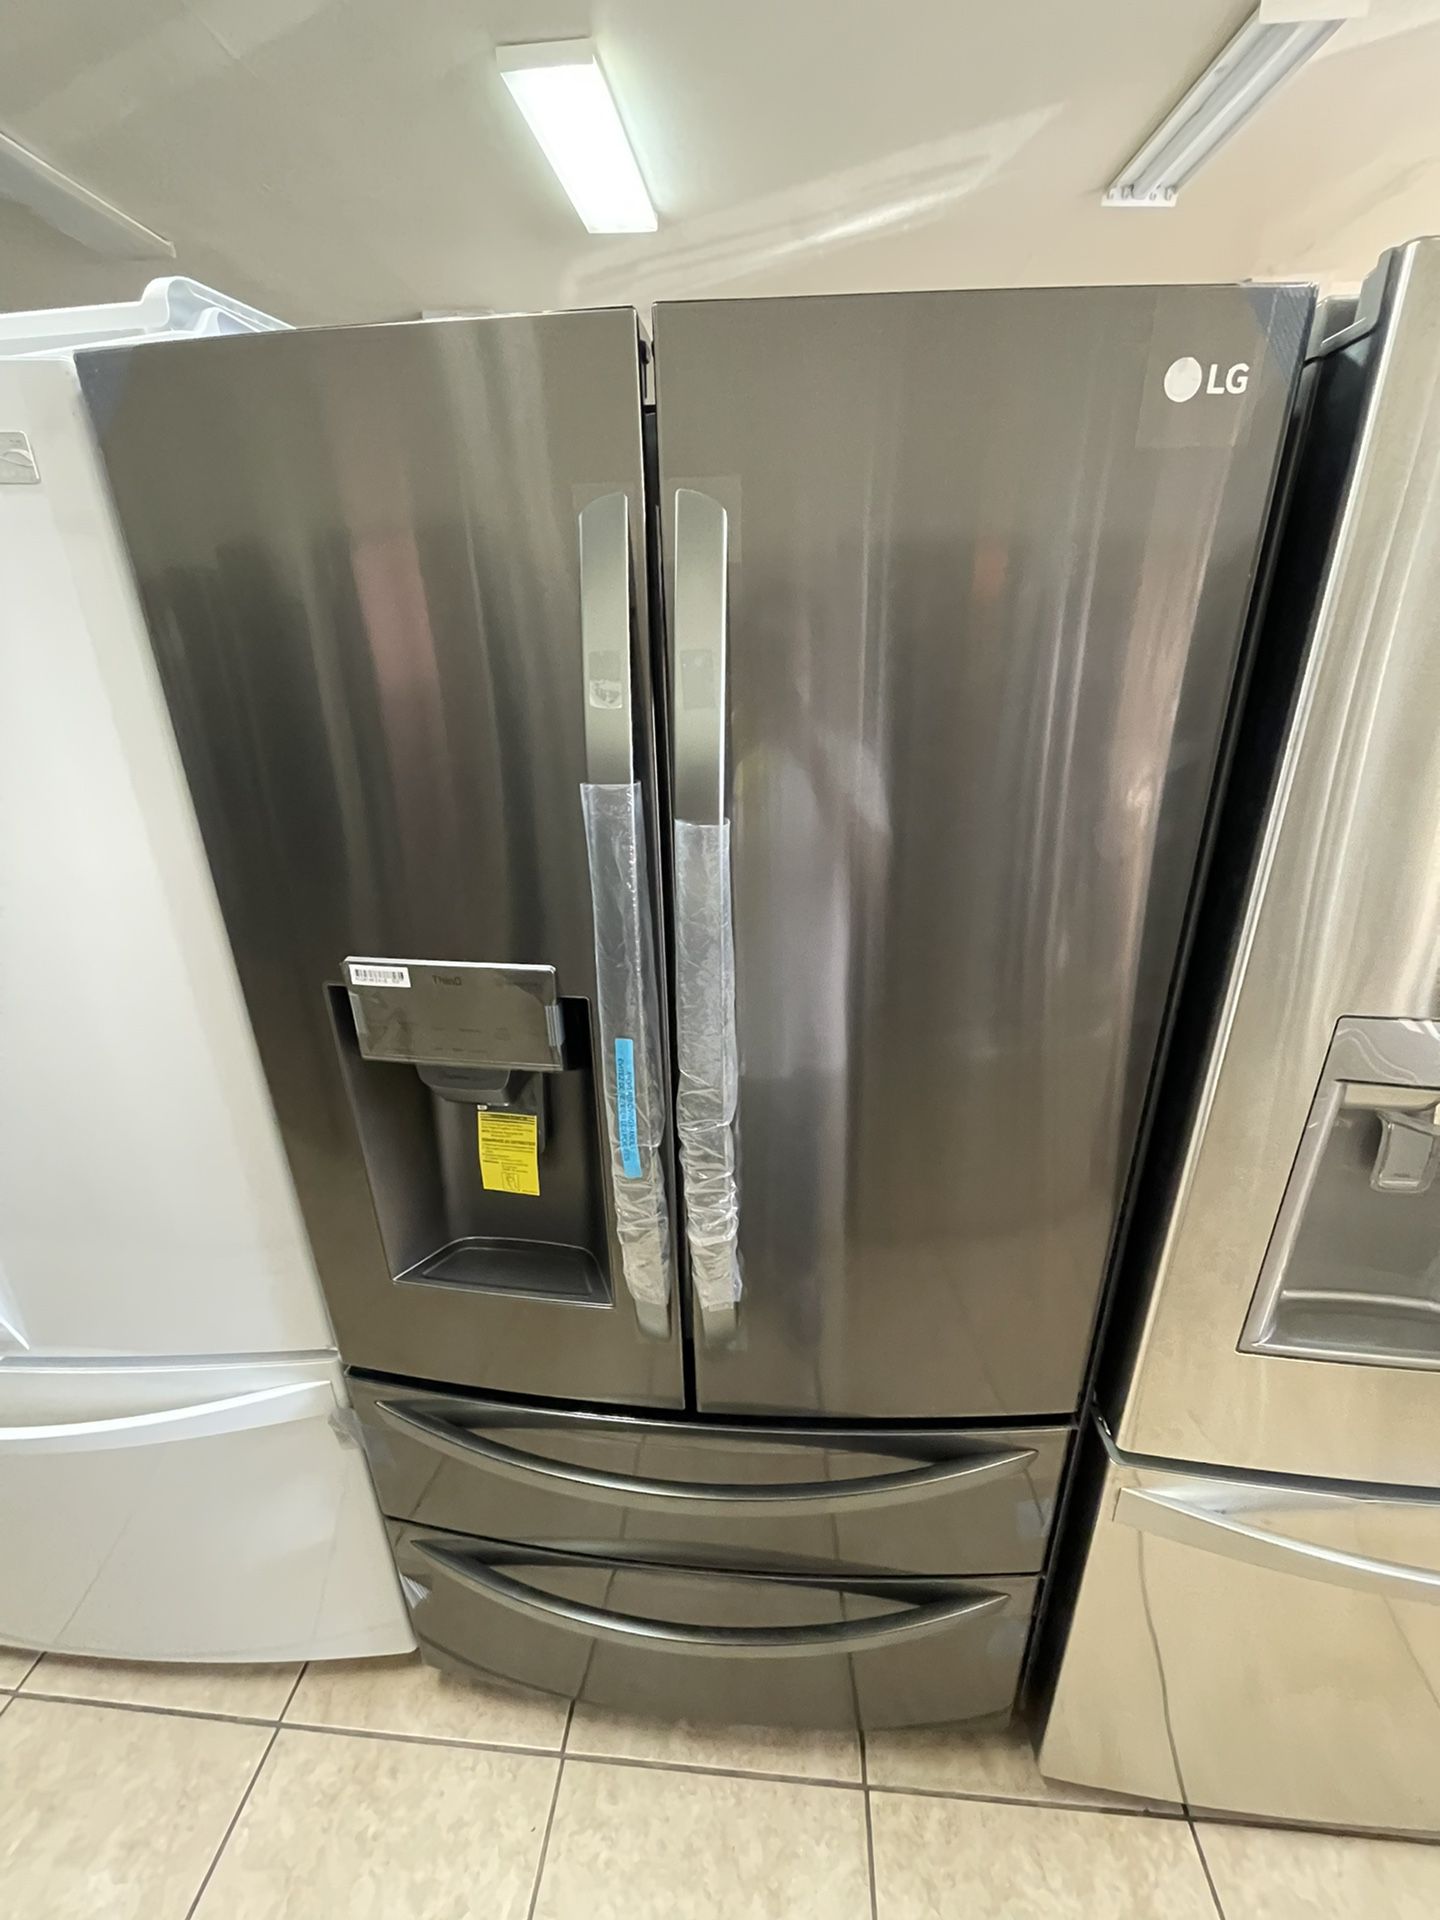 Brand New  Lg French Door Refrigerator In Perfect Working And Looking Condition 